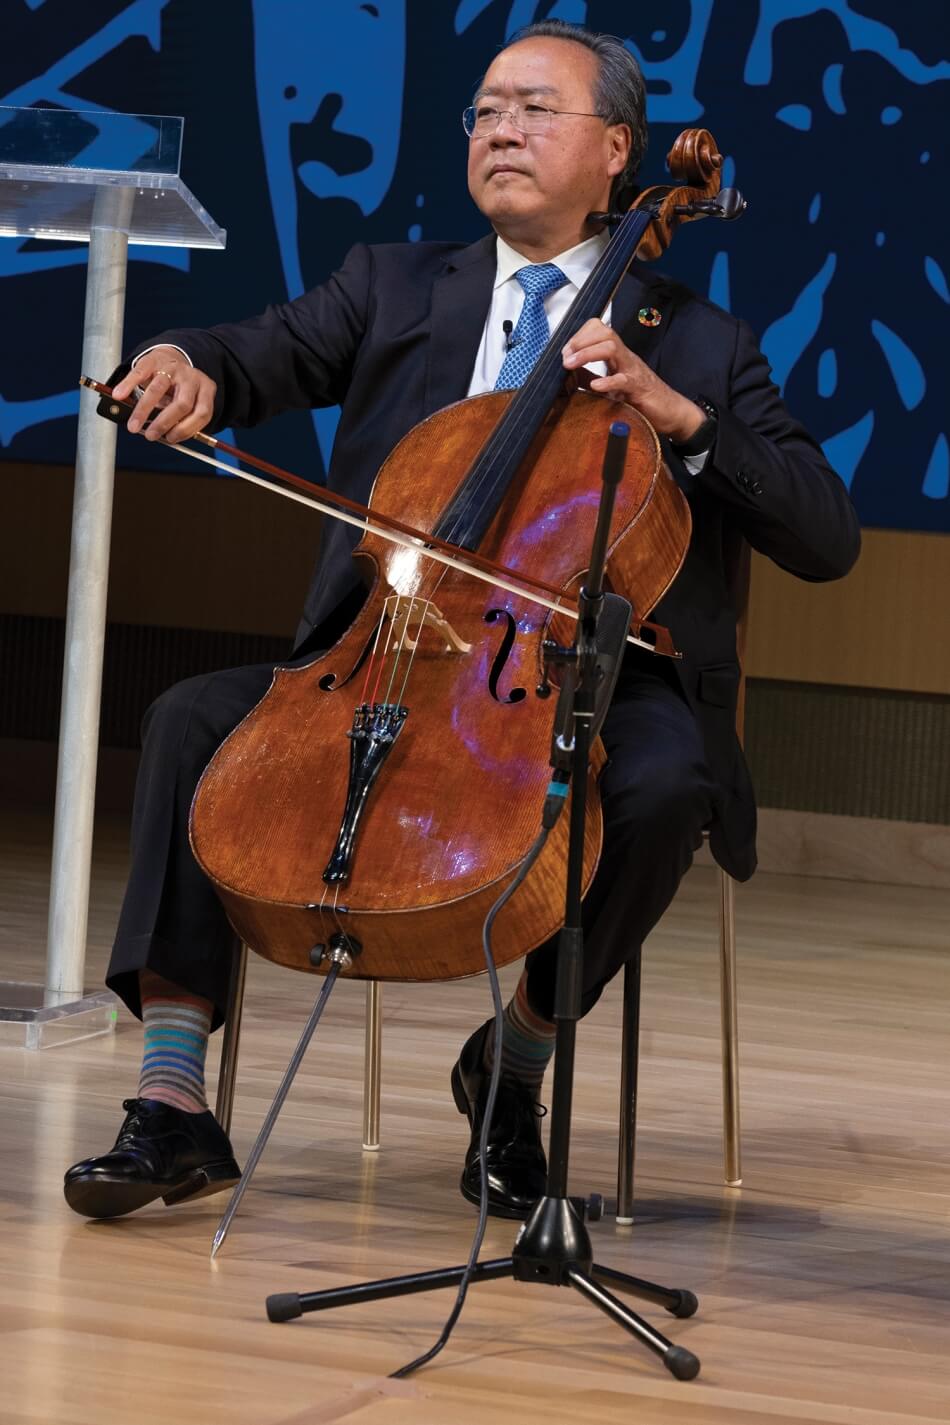 A portrait of Yo-Yo Ma playing the cello during the 2022 Induction ceremony. He has brown skin and short gray hair, and wears wire glasses, a bright blue tie, a white collared shirt, a dark blue suit, multicolored striped socks, black shoes, and a lapel pin in support of the UN Sustainable Development Goals. He holds a bow to the strings of a cello in one hand and balances the neck of the cello with the other. Photo by Martha Stewart Photography.